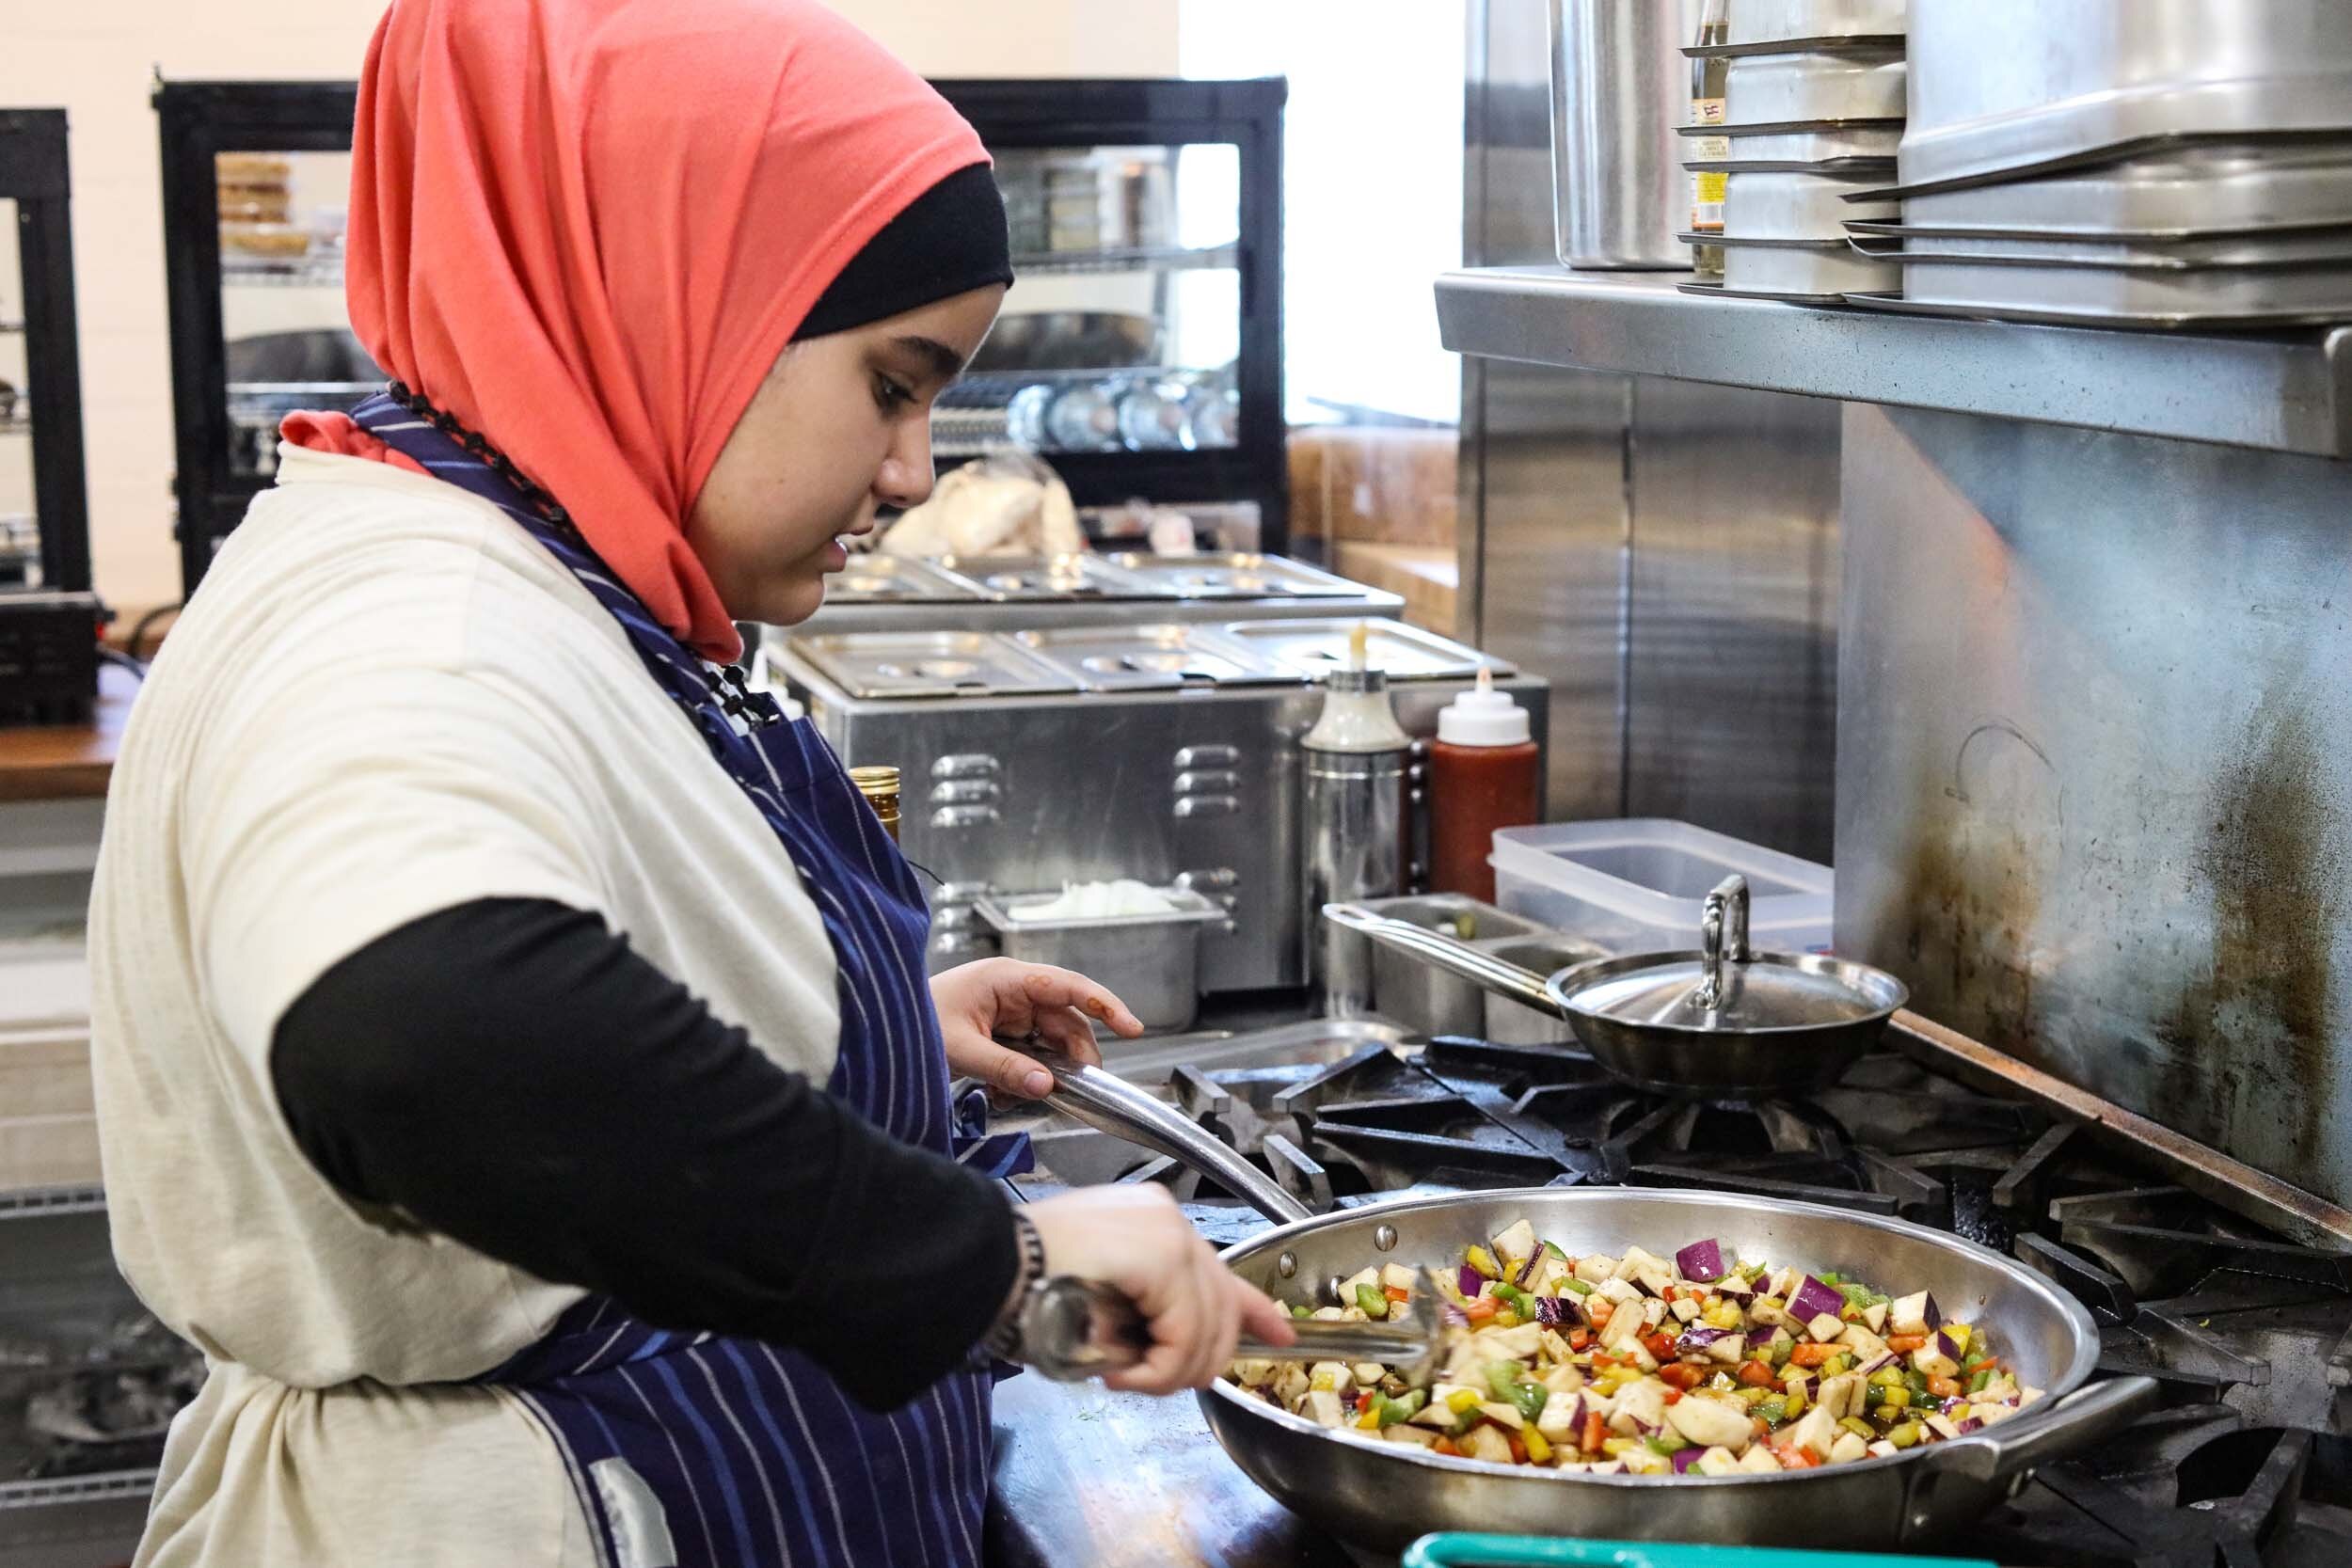  Syrian cook, Ibtisam Masto, shares her culinary heritage with Cincinnati. Find her and her family at the Oakley Kitchen Food Hall or Findlay Market on the weekends. Photo by Julie Kramer 